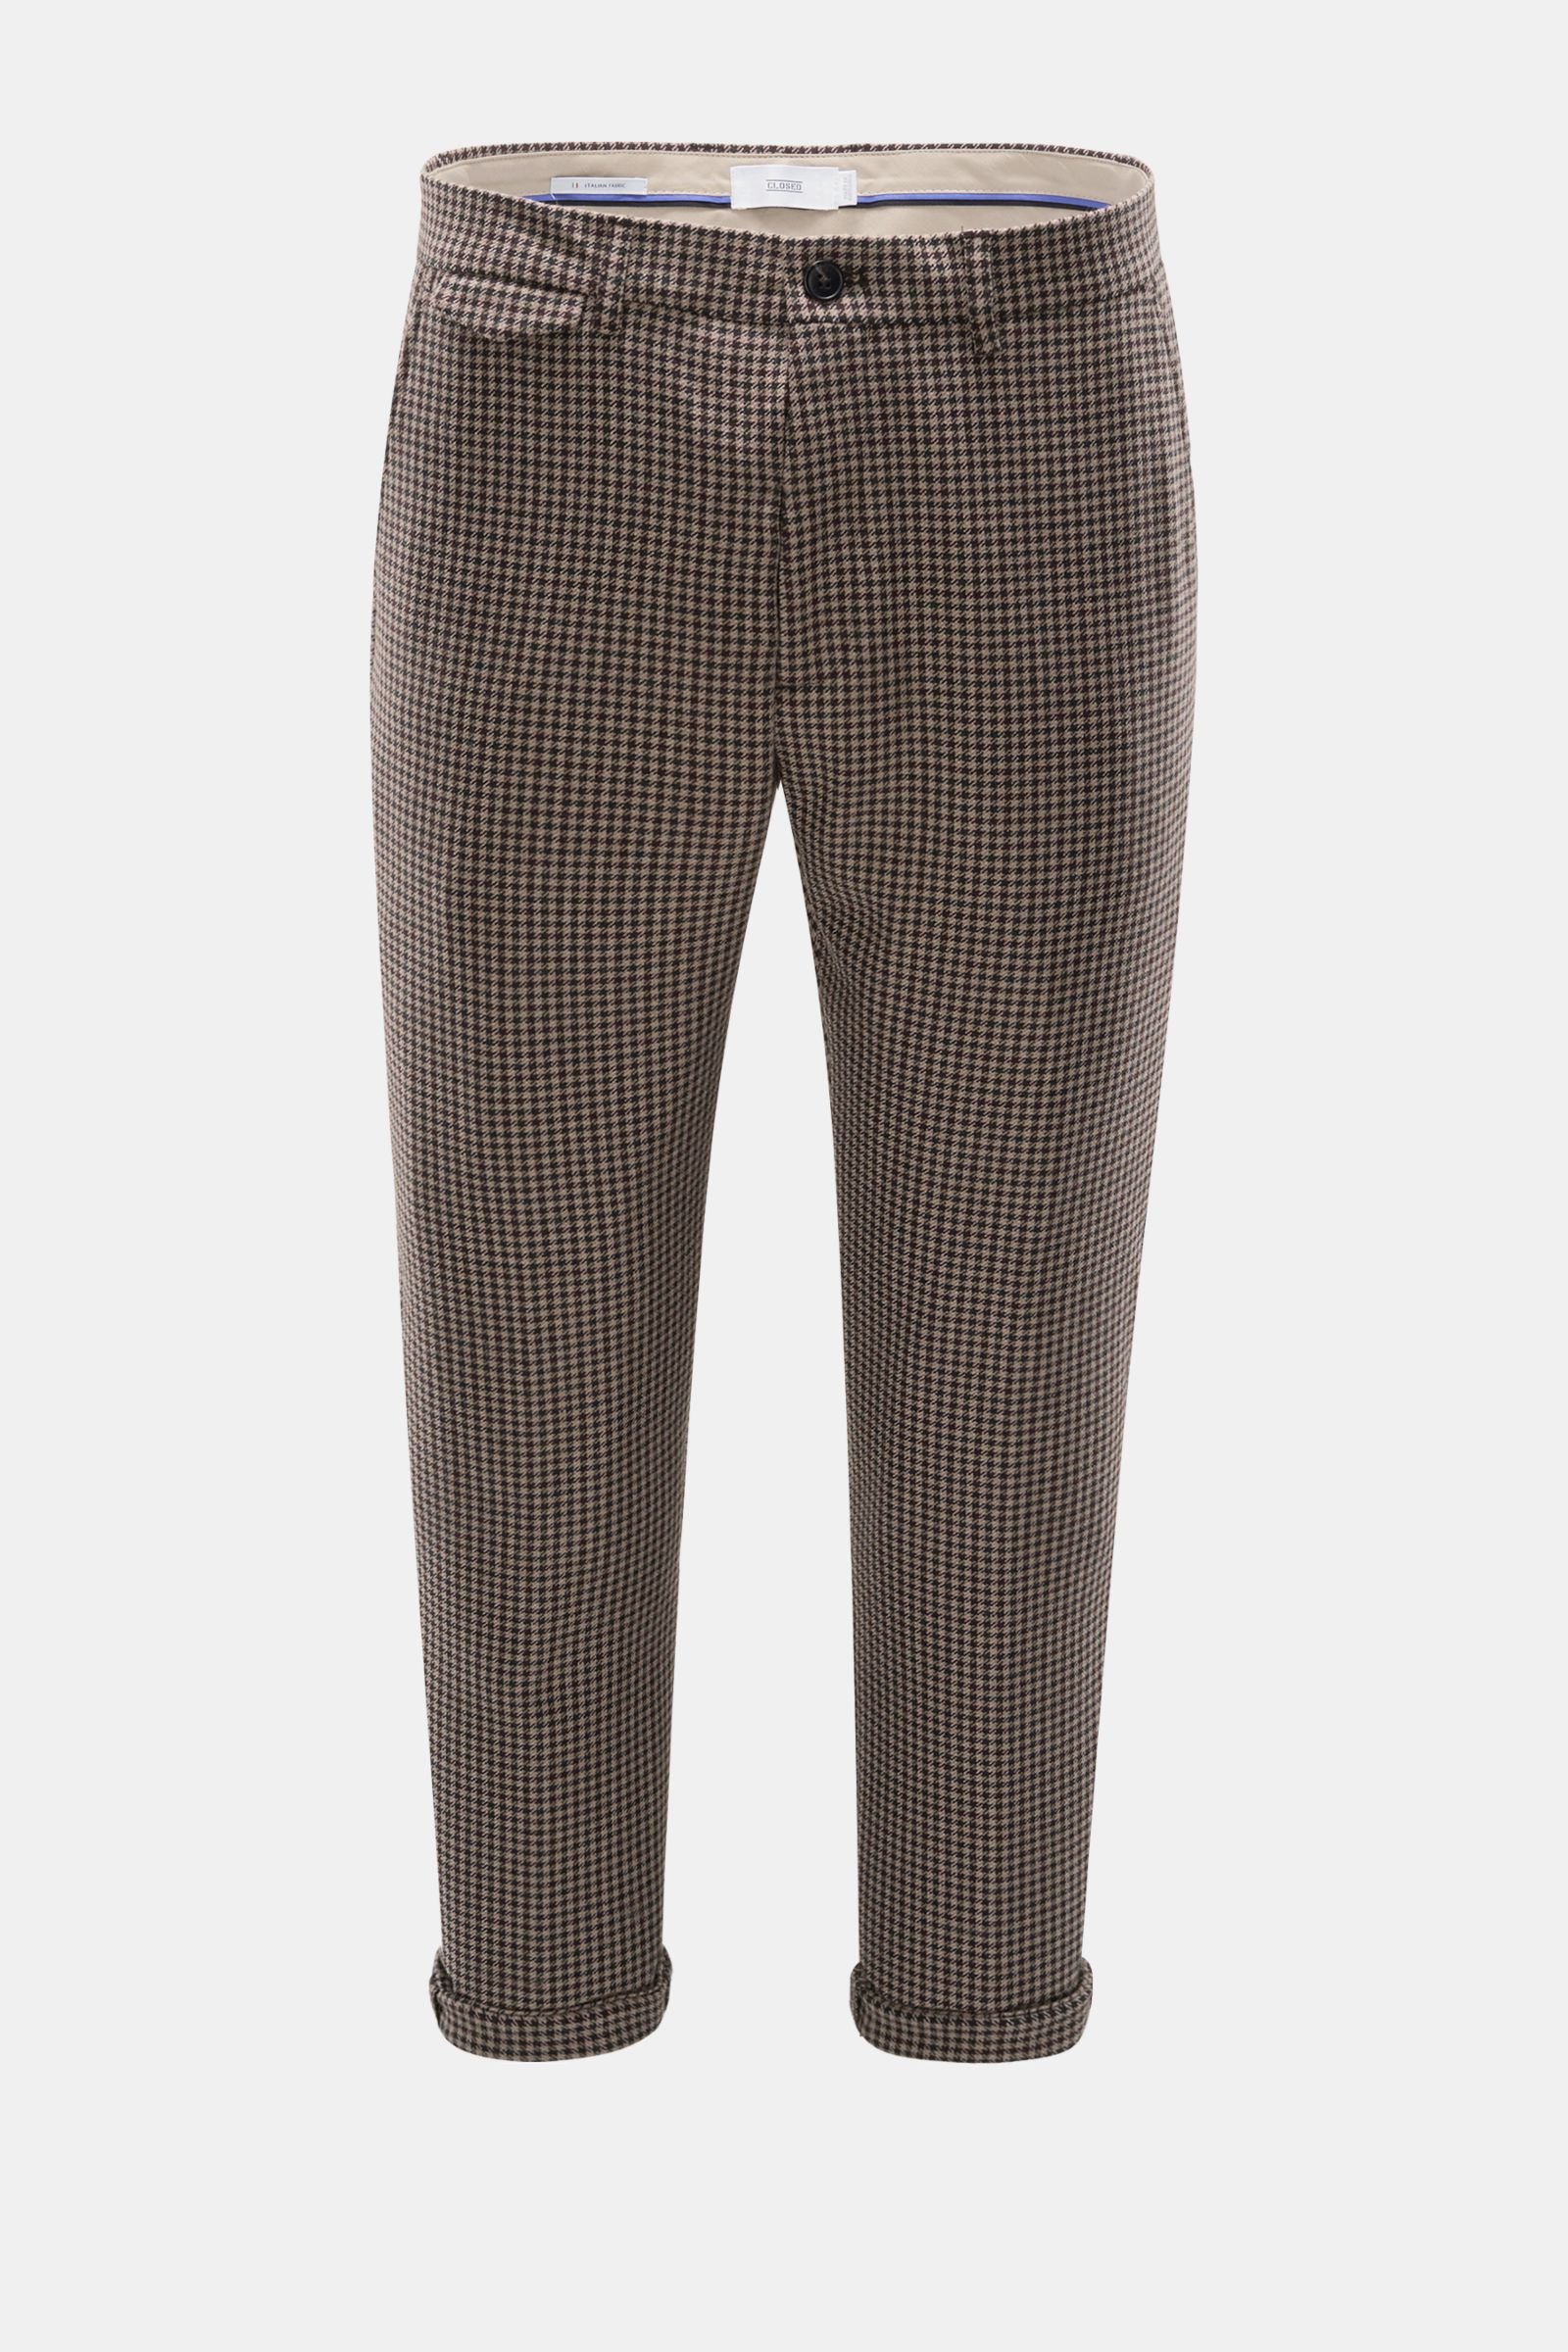 Trousers 'Atelier Tapered' beige/dark brown checked